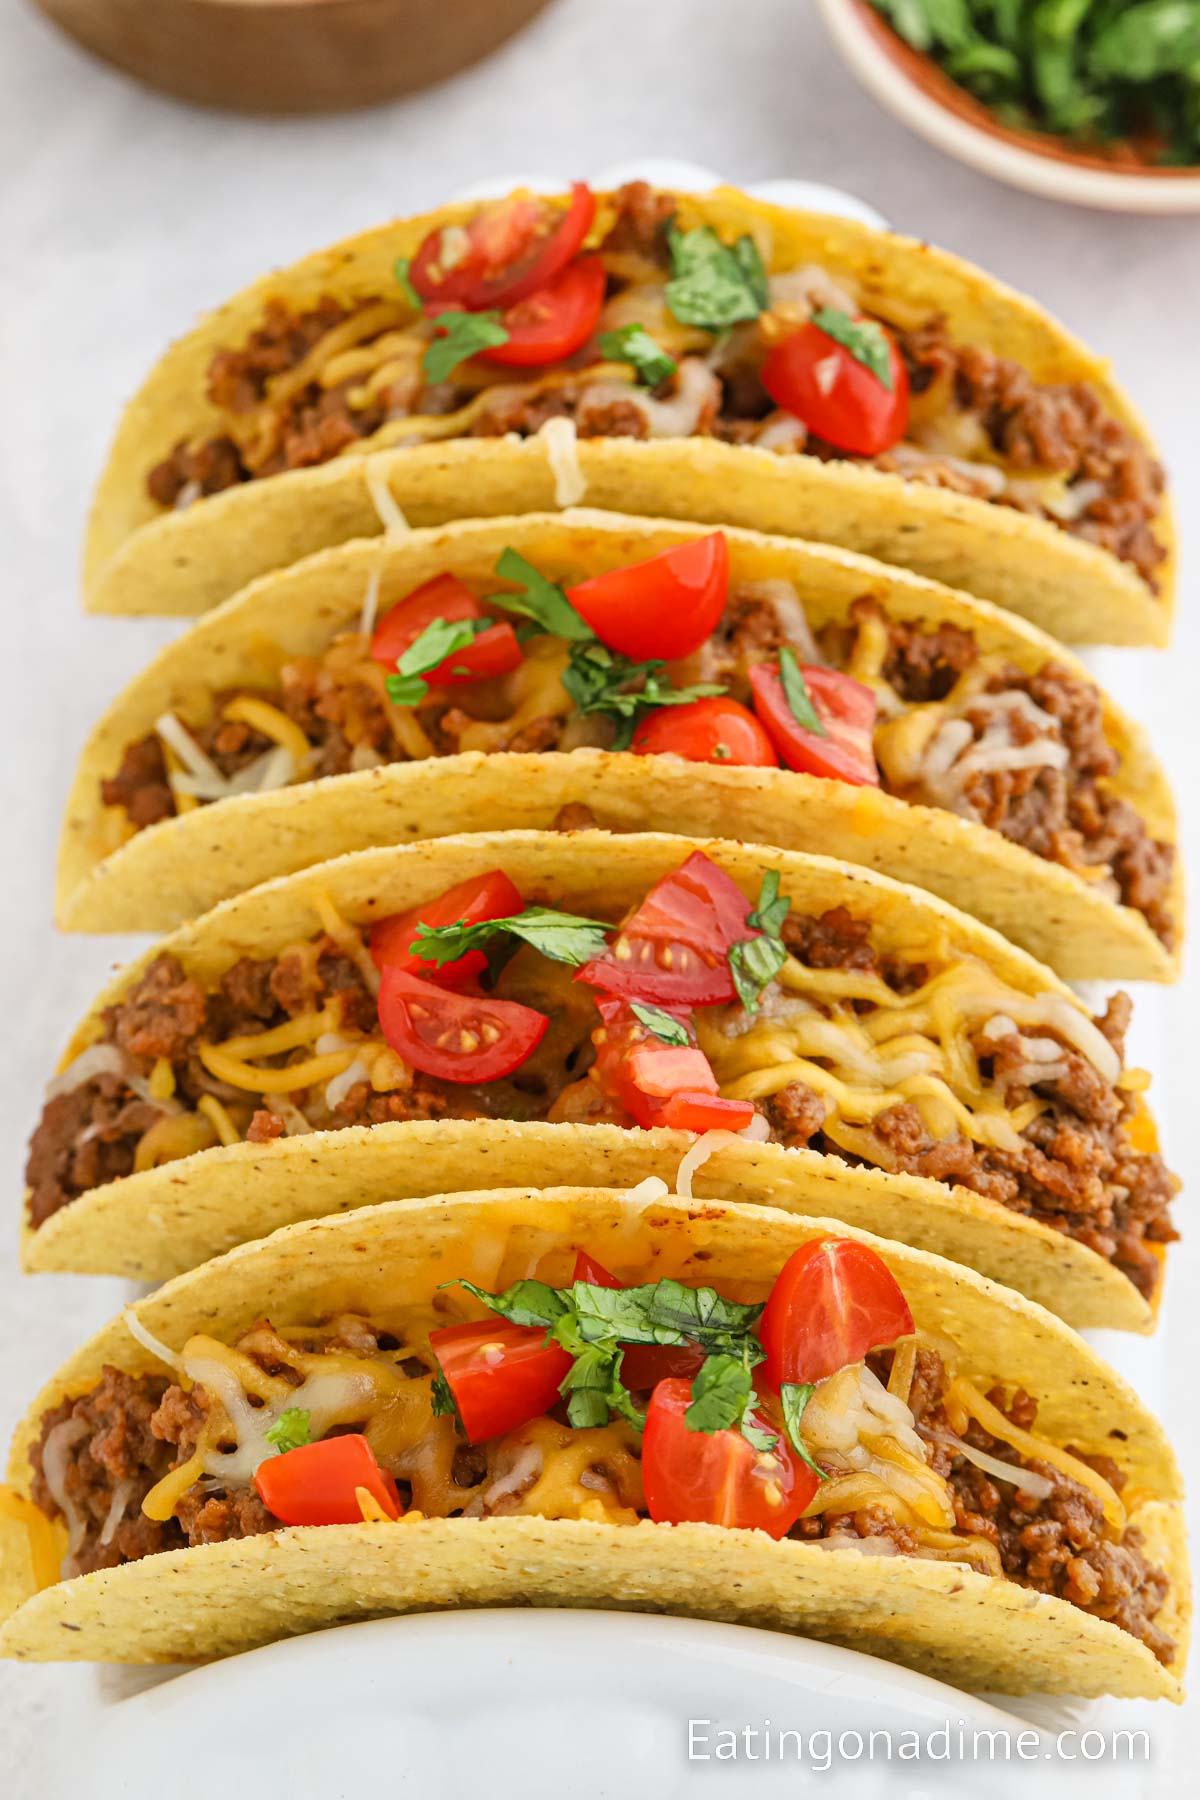 Sloppy Joes tacos in a taco stand